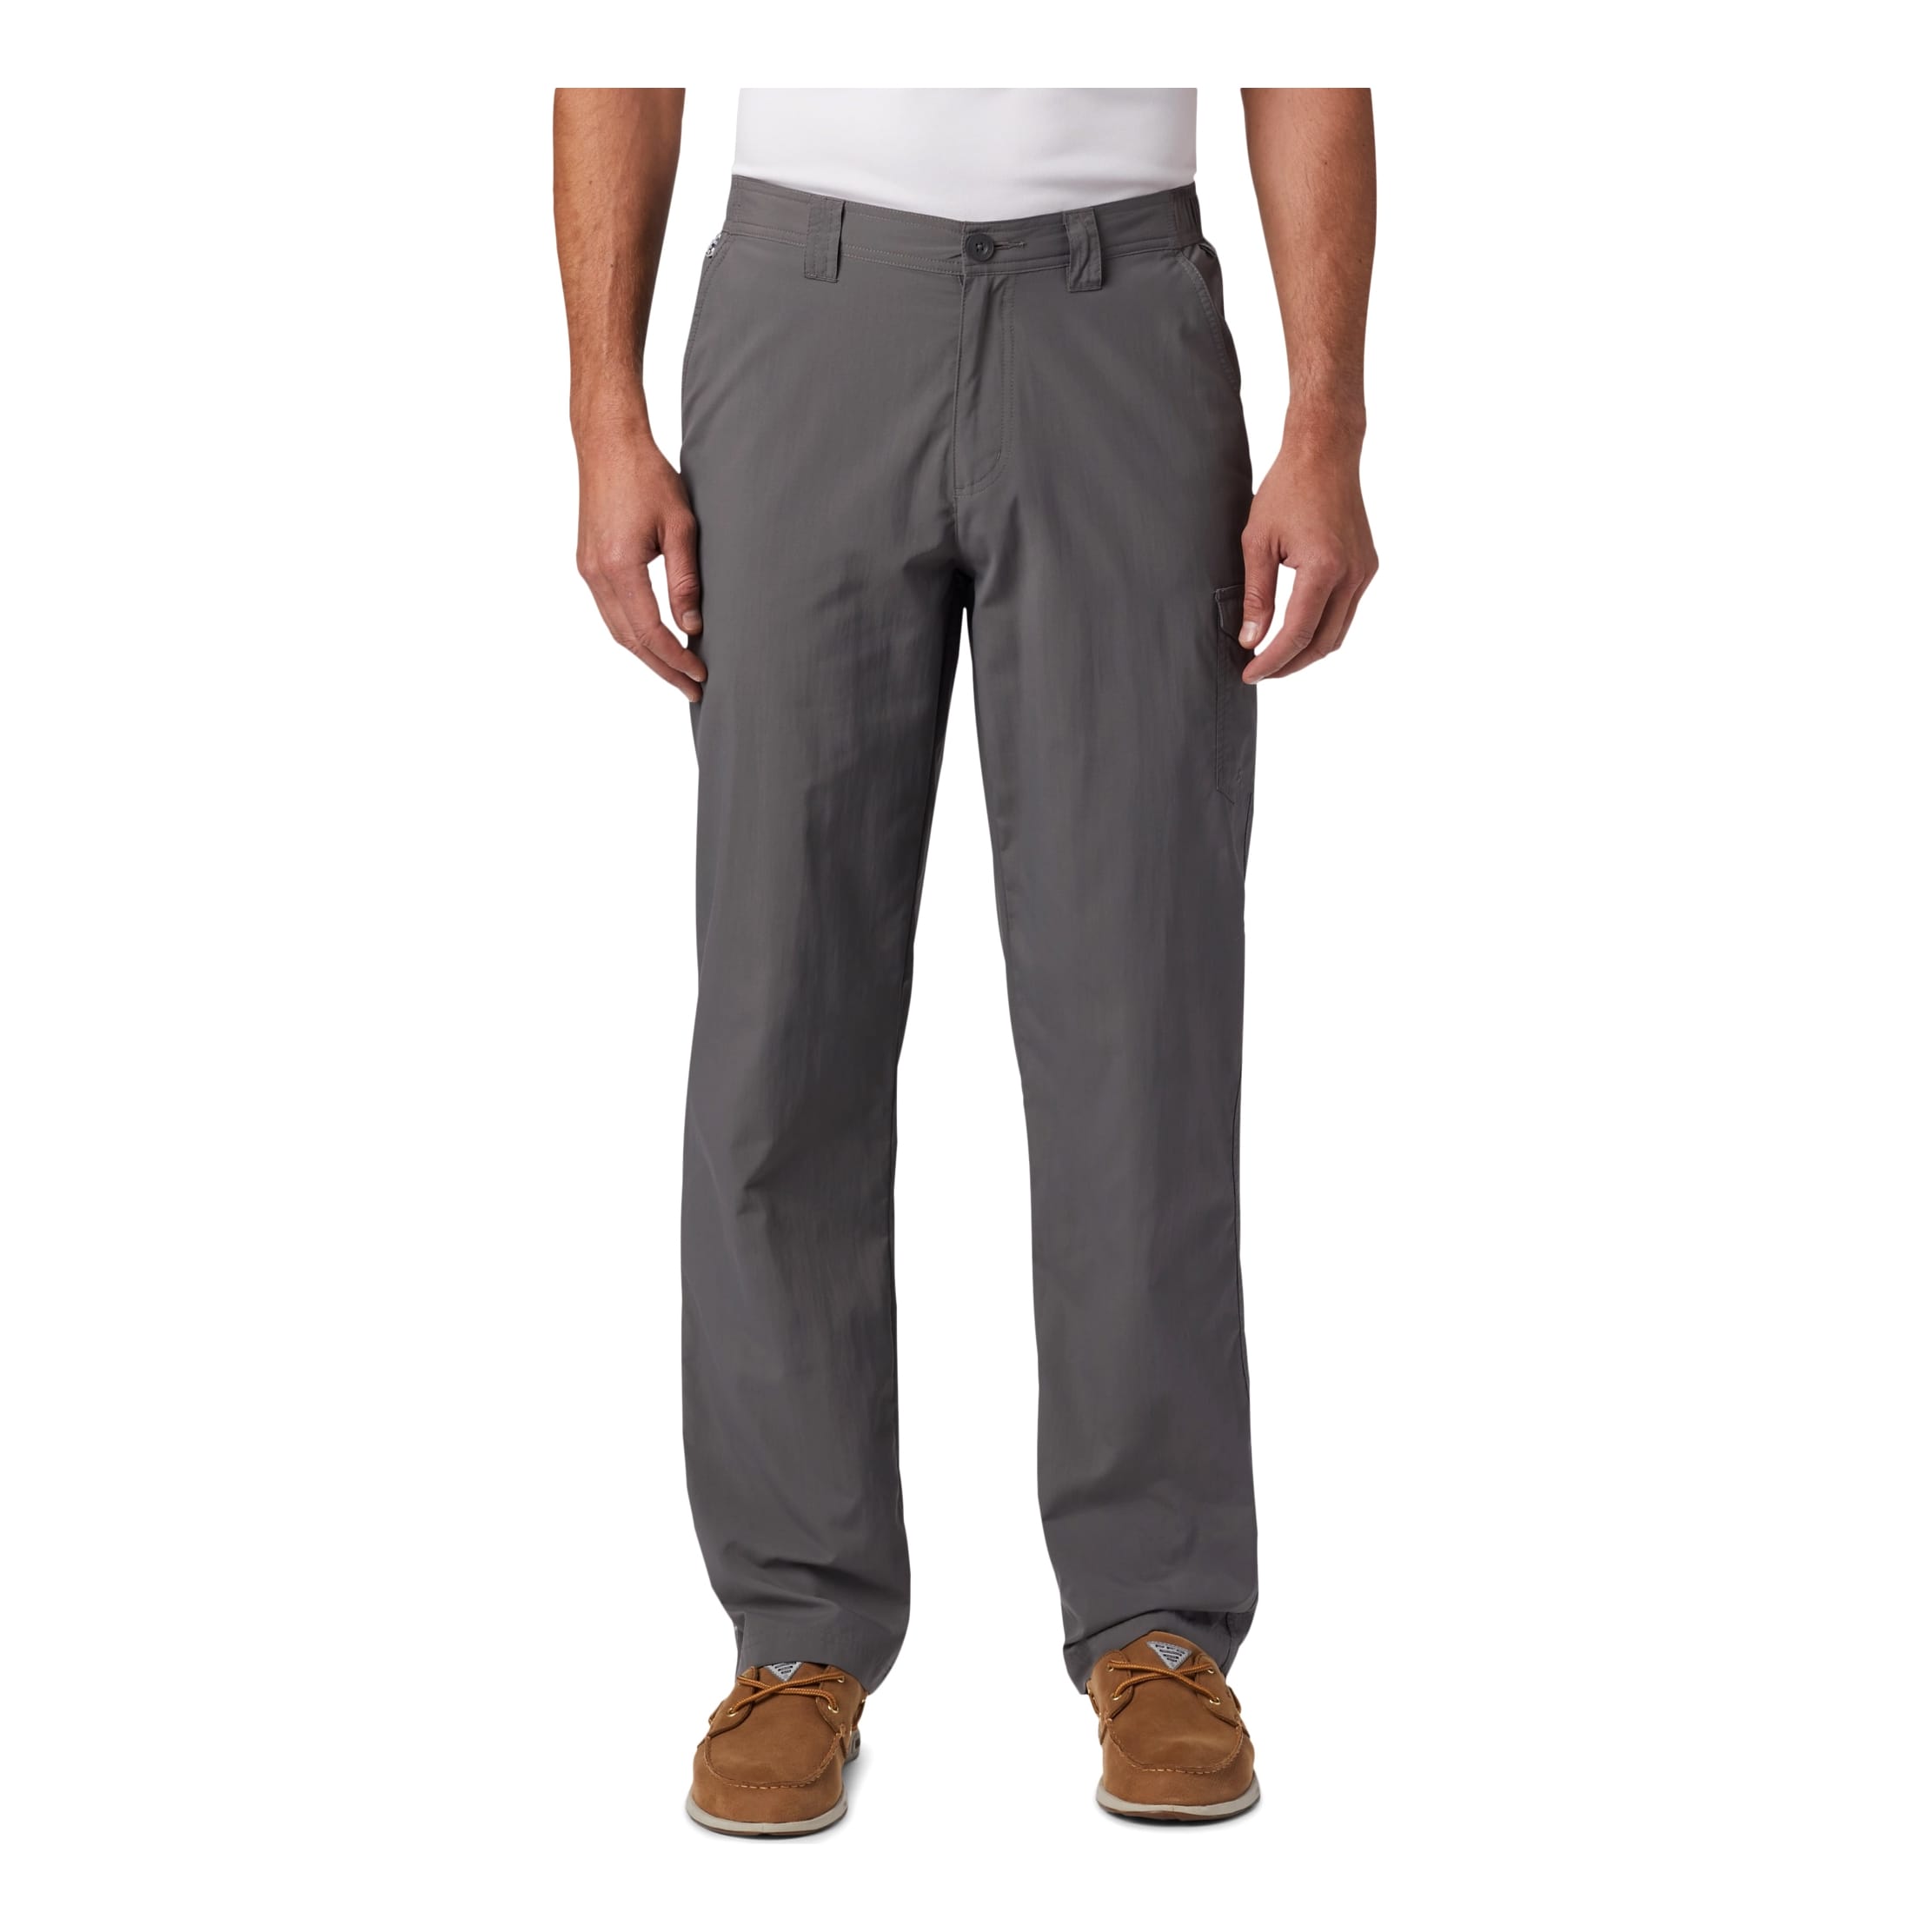 Final Flight Outfitters Inc. Columbia Sportswear Company Columbia Blood  And Guts Pant